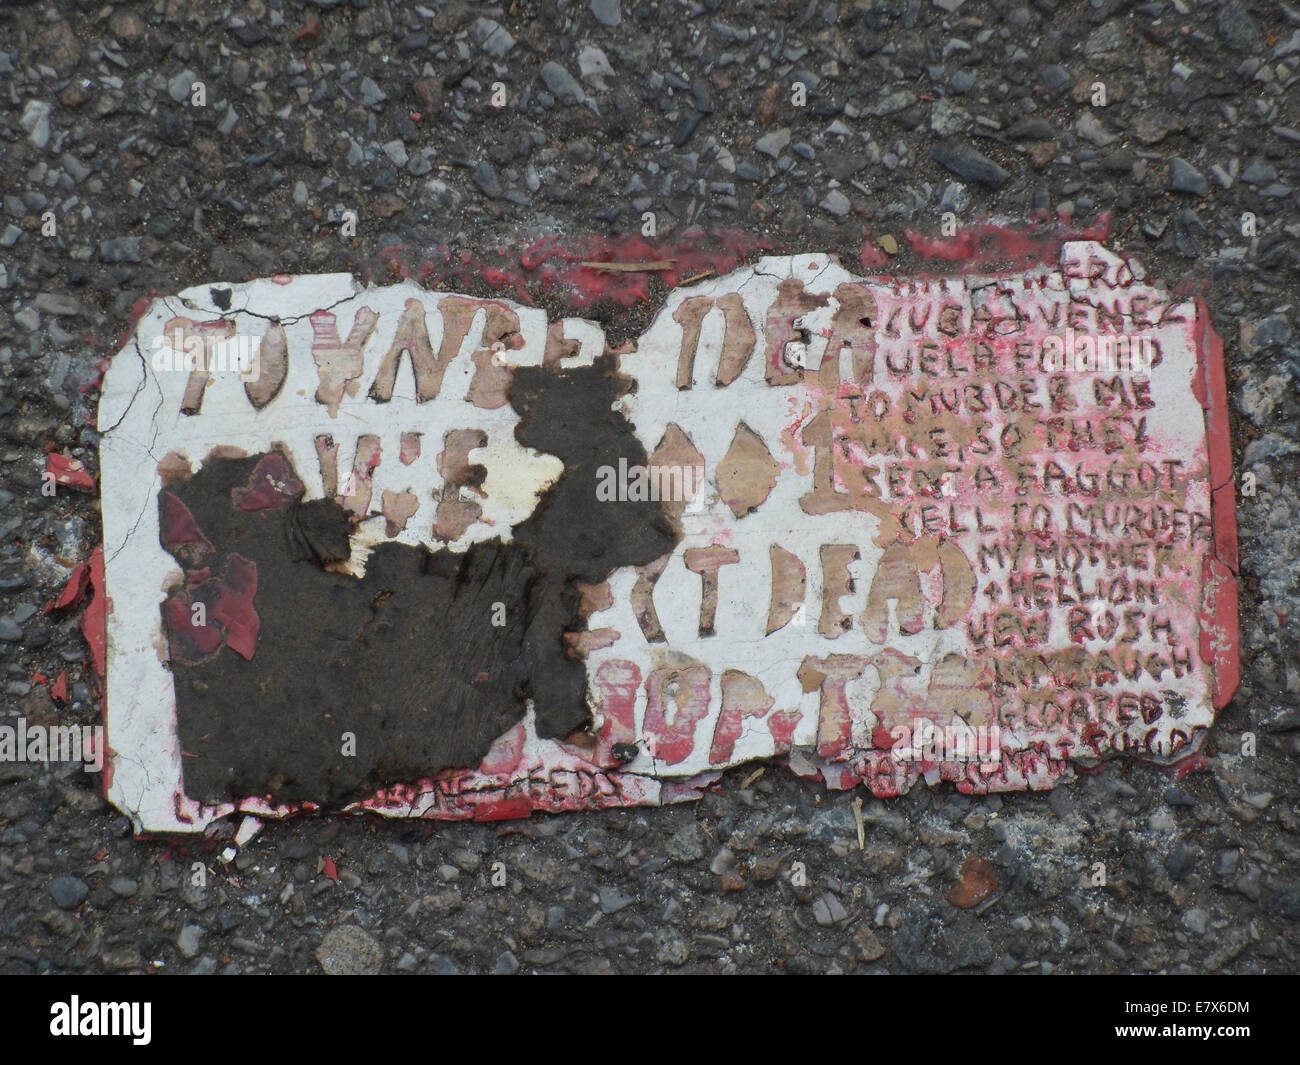 A Toynbee Tile is seen embedded into the pavement at a site in the Chelsea neighborhood of New York Stock Photo